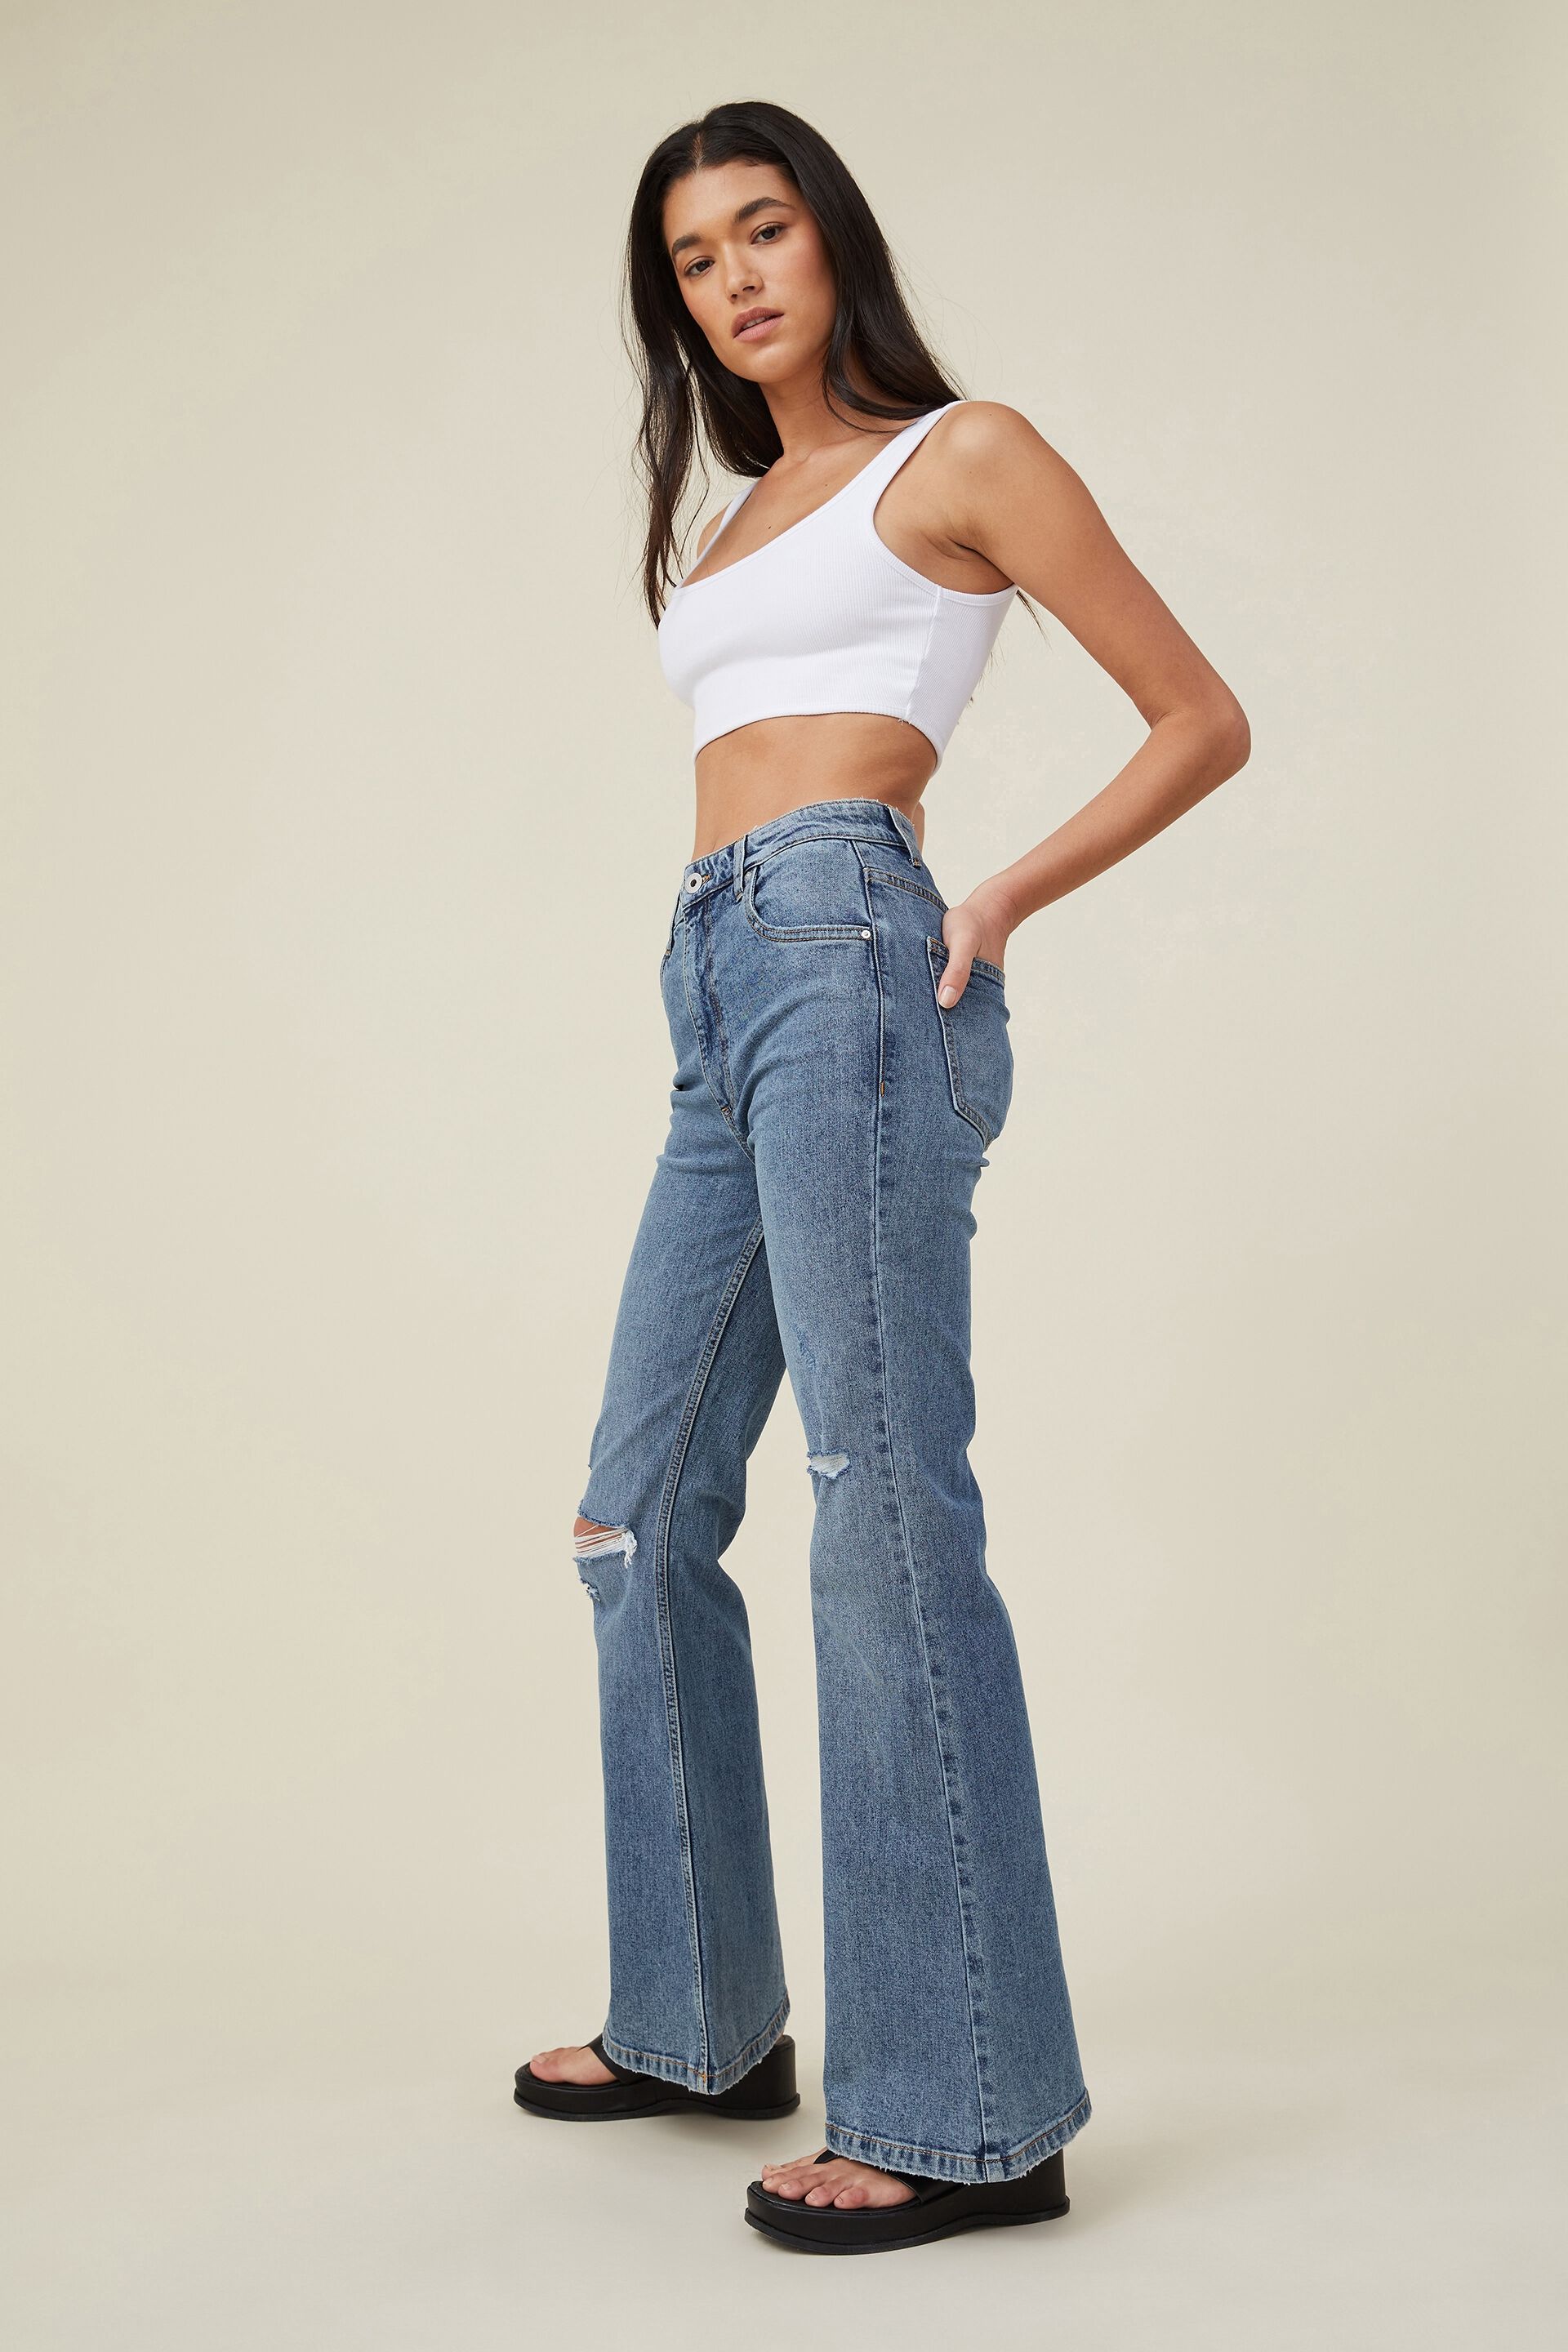 The 70s denim trend is back Heres how to wear and flaunt flare jeans